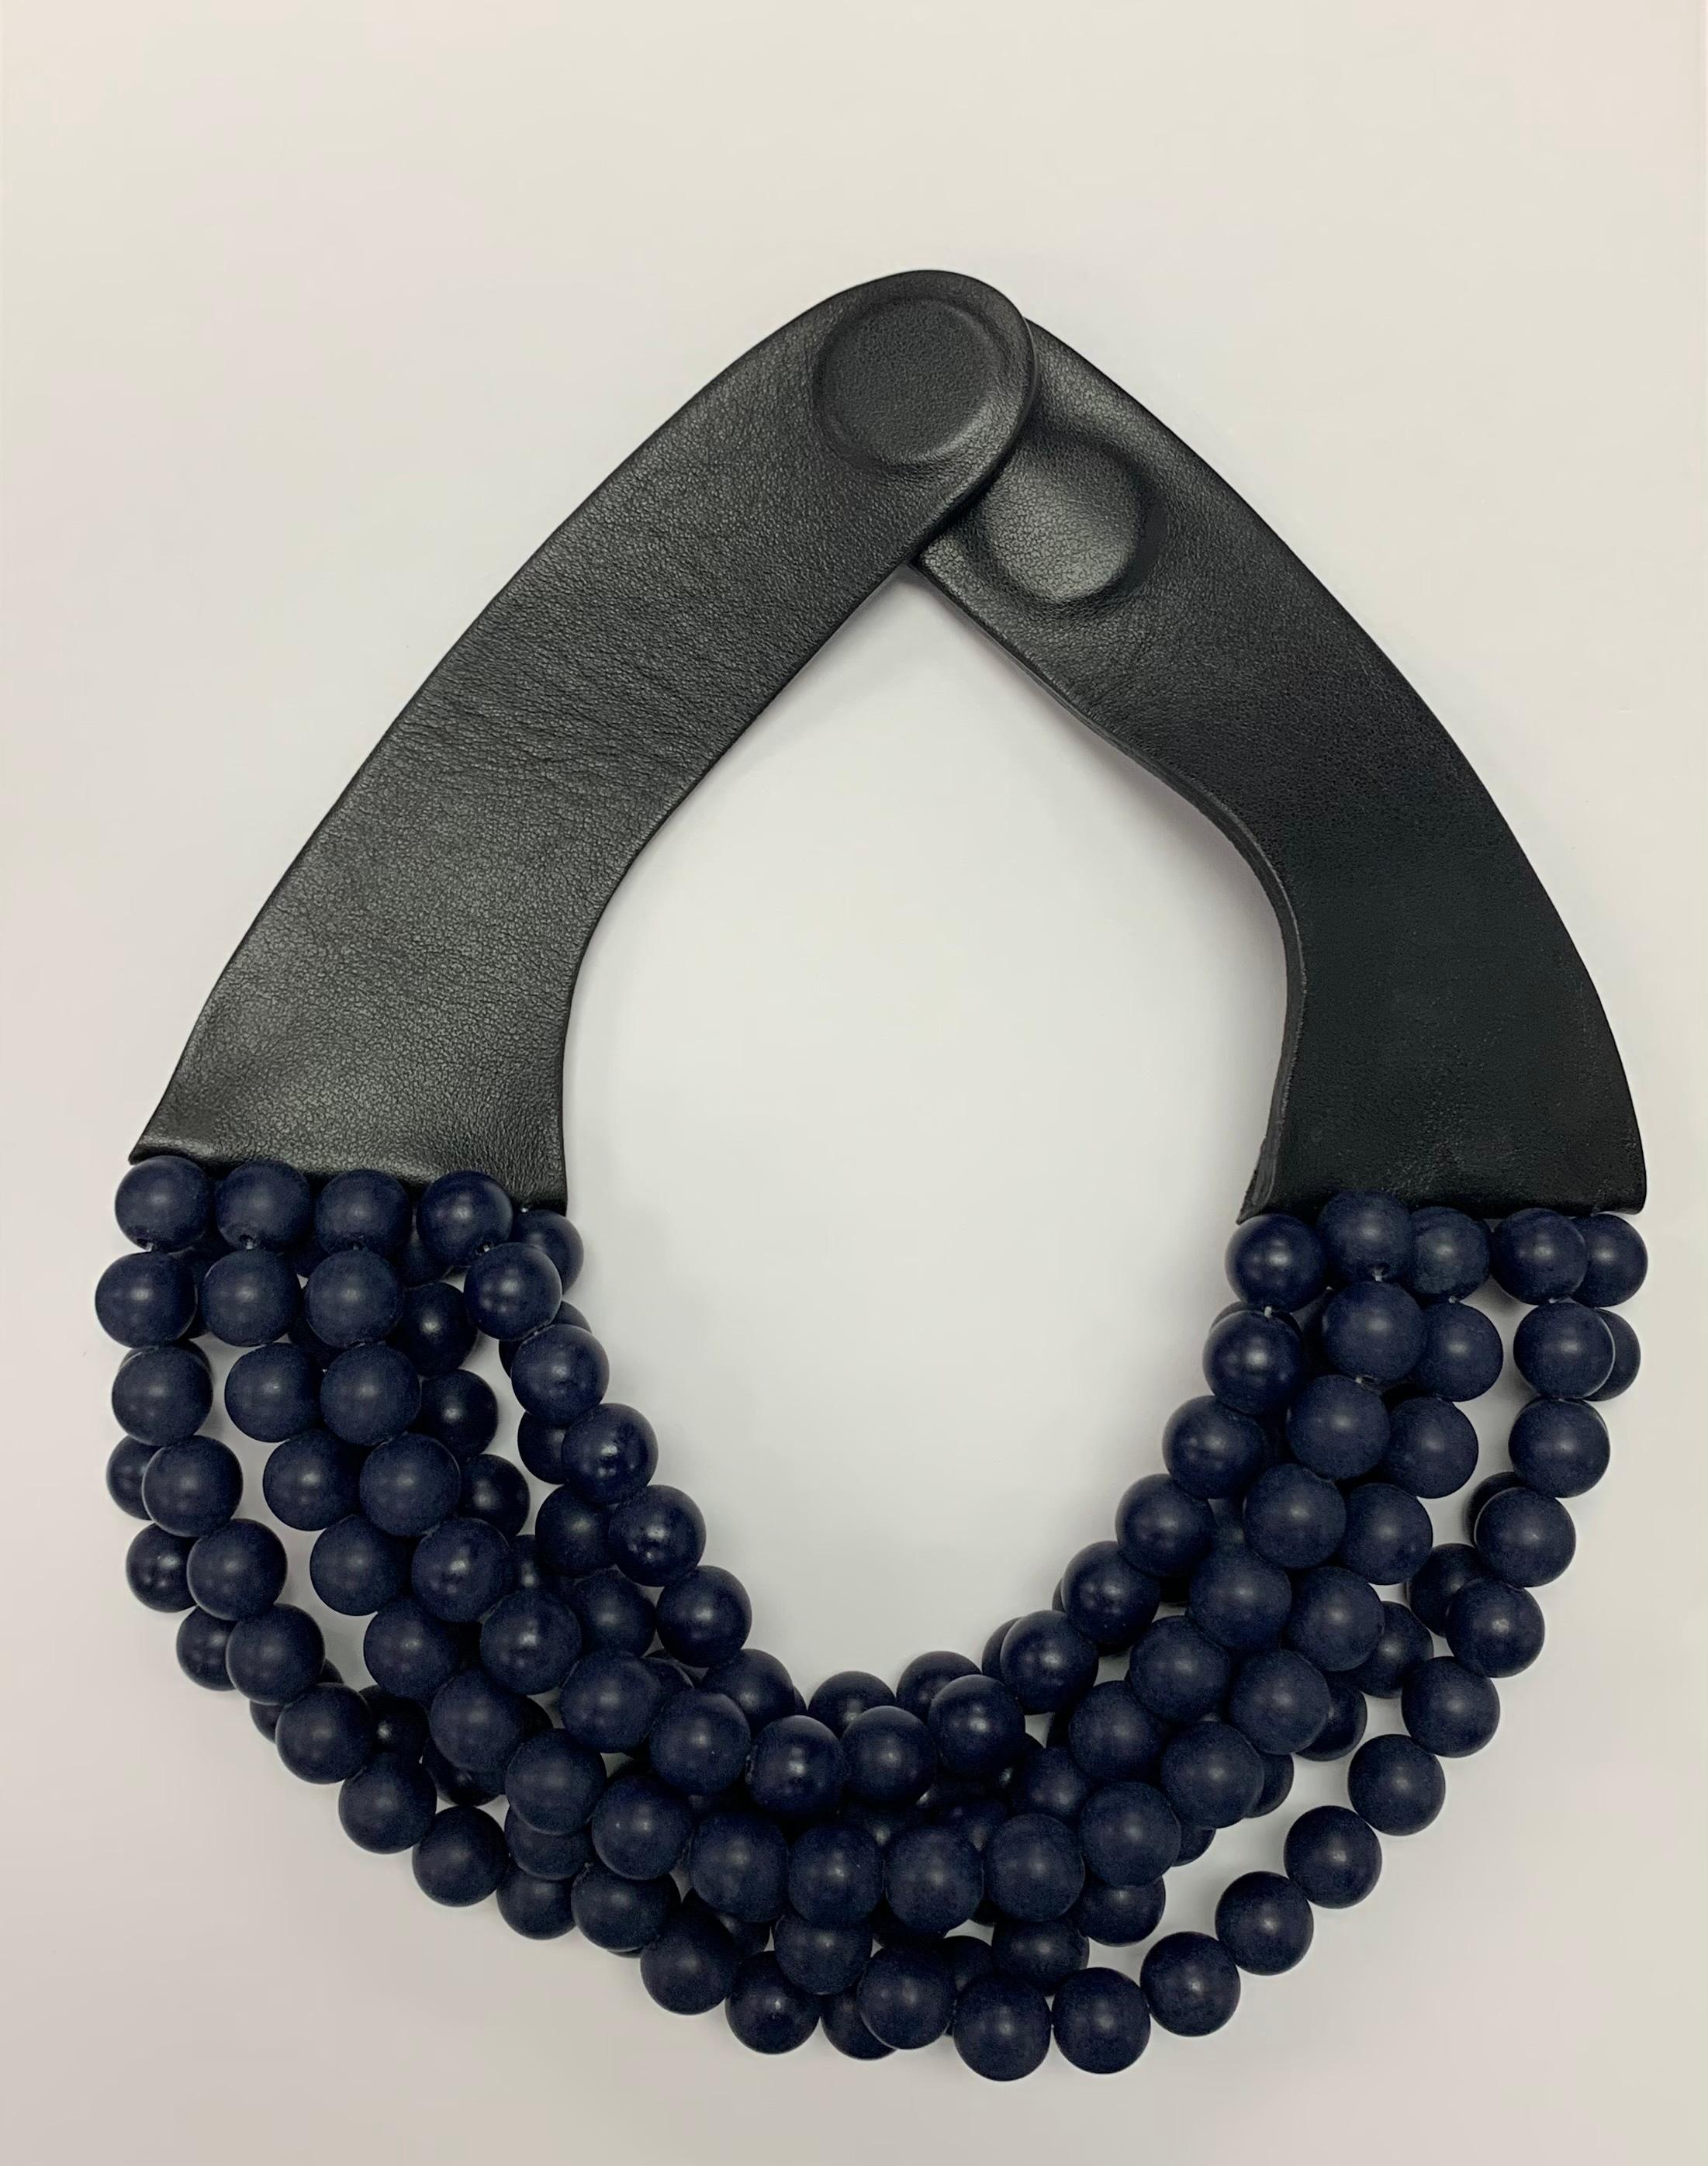 Simply Fabulous! Designer 8 Row Multi Strand Dark Gray Bead and Leather Necklace with magnetic clasp closure. Necklace measures approx. 18